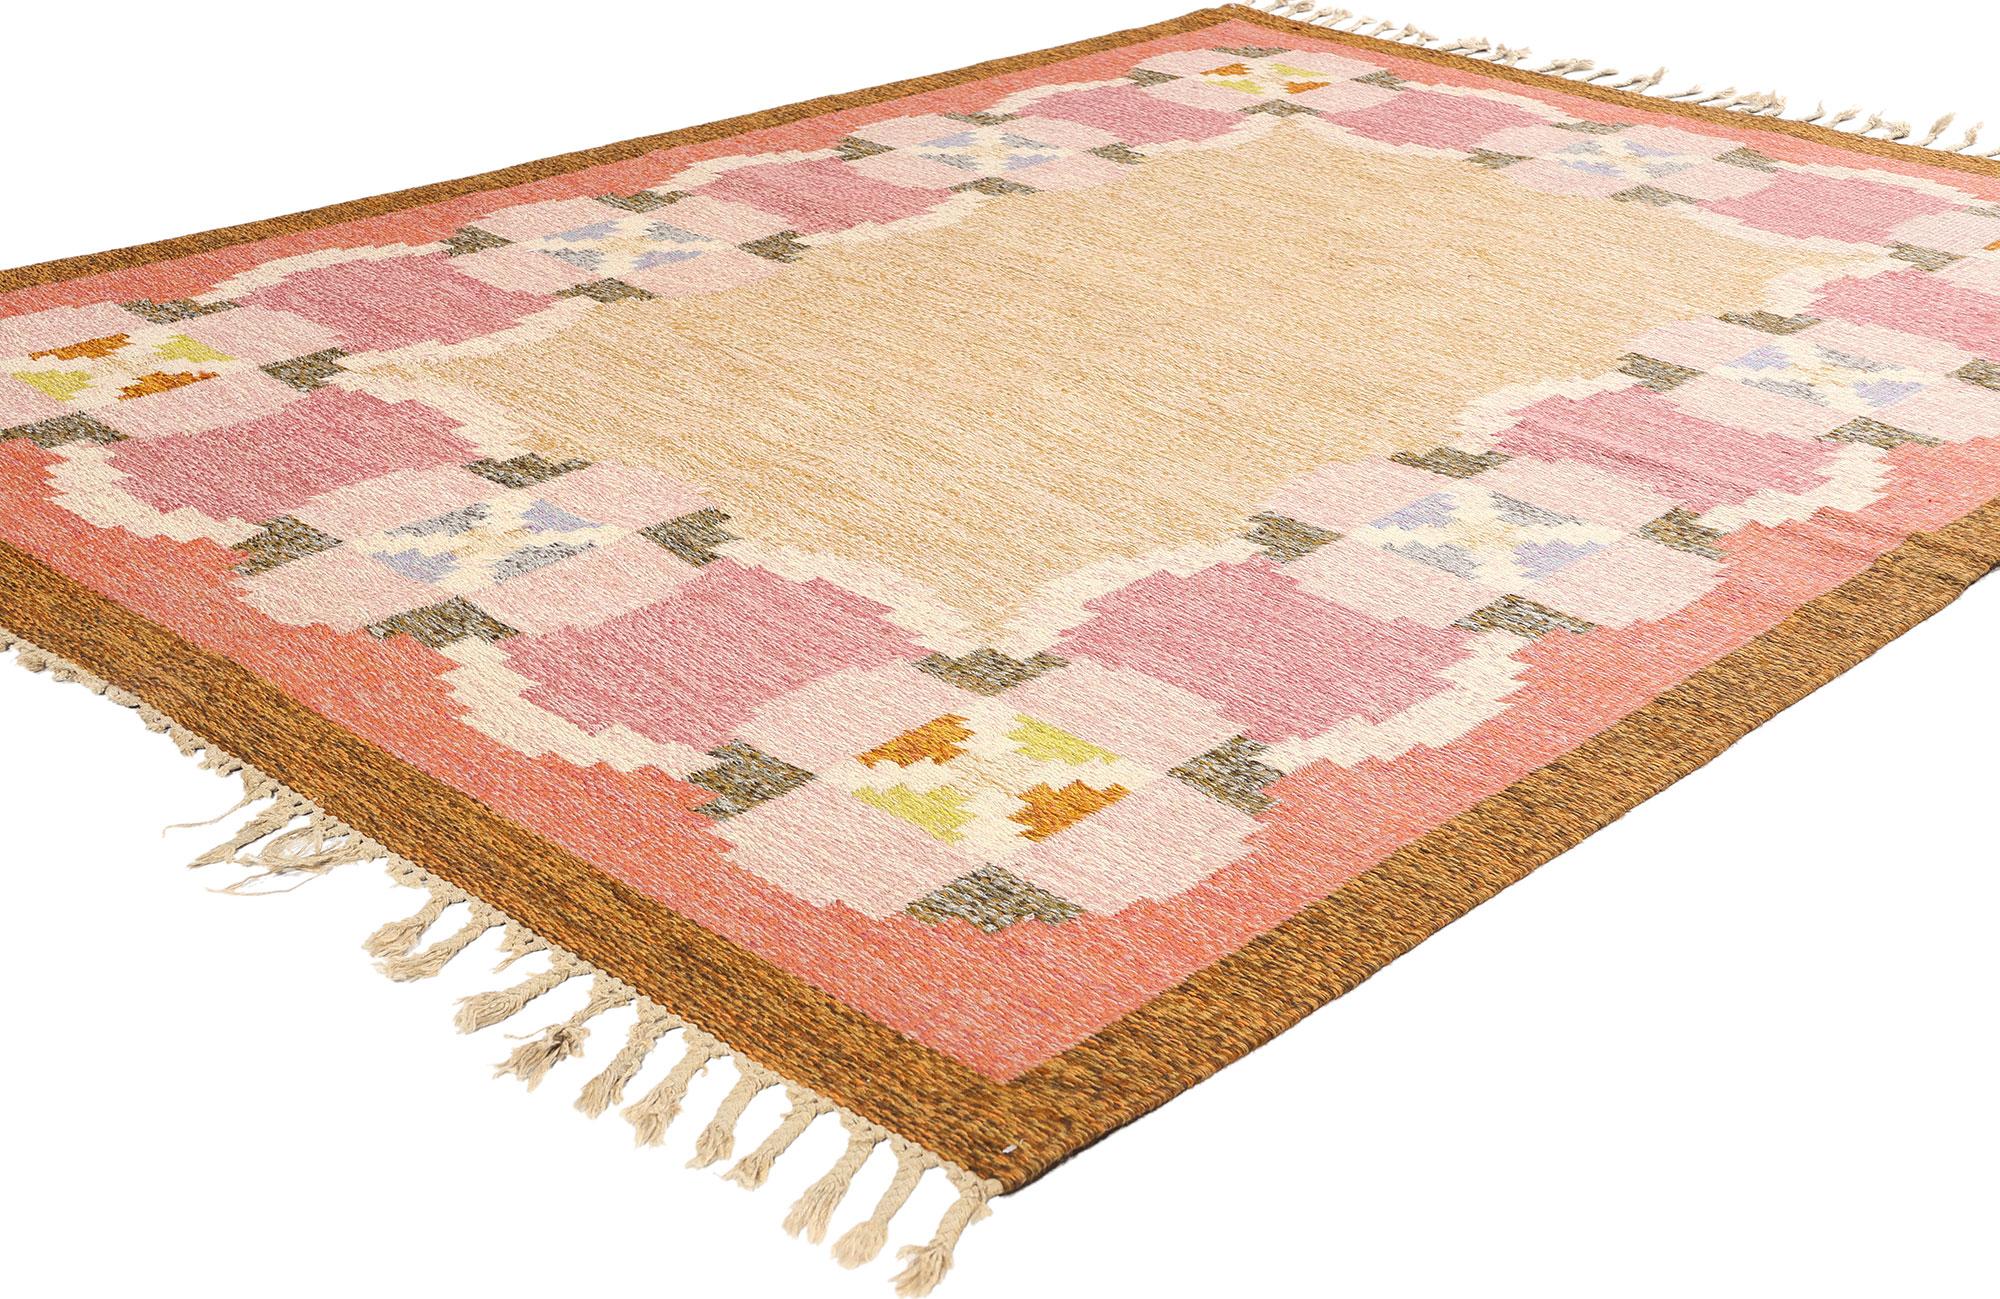 78257 Ingegerd Silow Vintage Swedish Kilim Rollakan Rug, 05'06 x 07'07. Ingegerd Silow (1916-2005) emerges as a highly influential figure in midcentury Swedish carpet design, particularly renowned for her prolific output in the flat weave rollakan